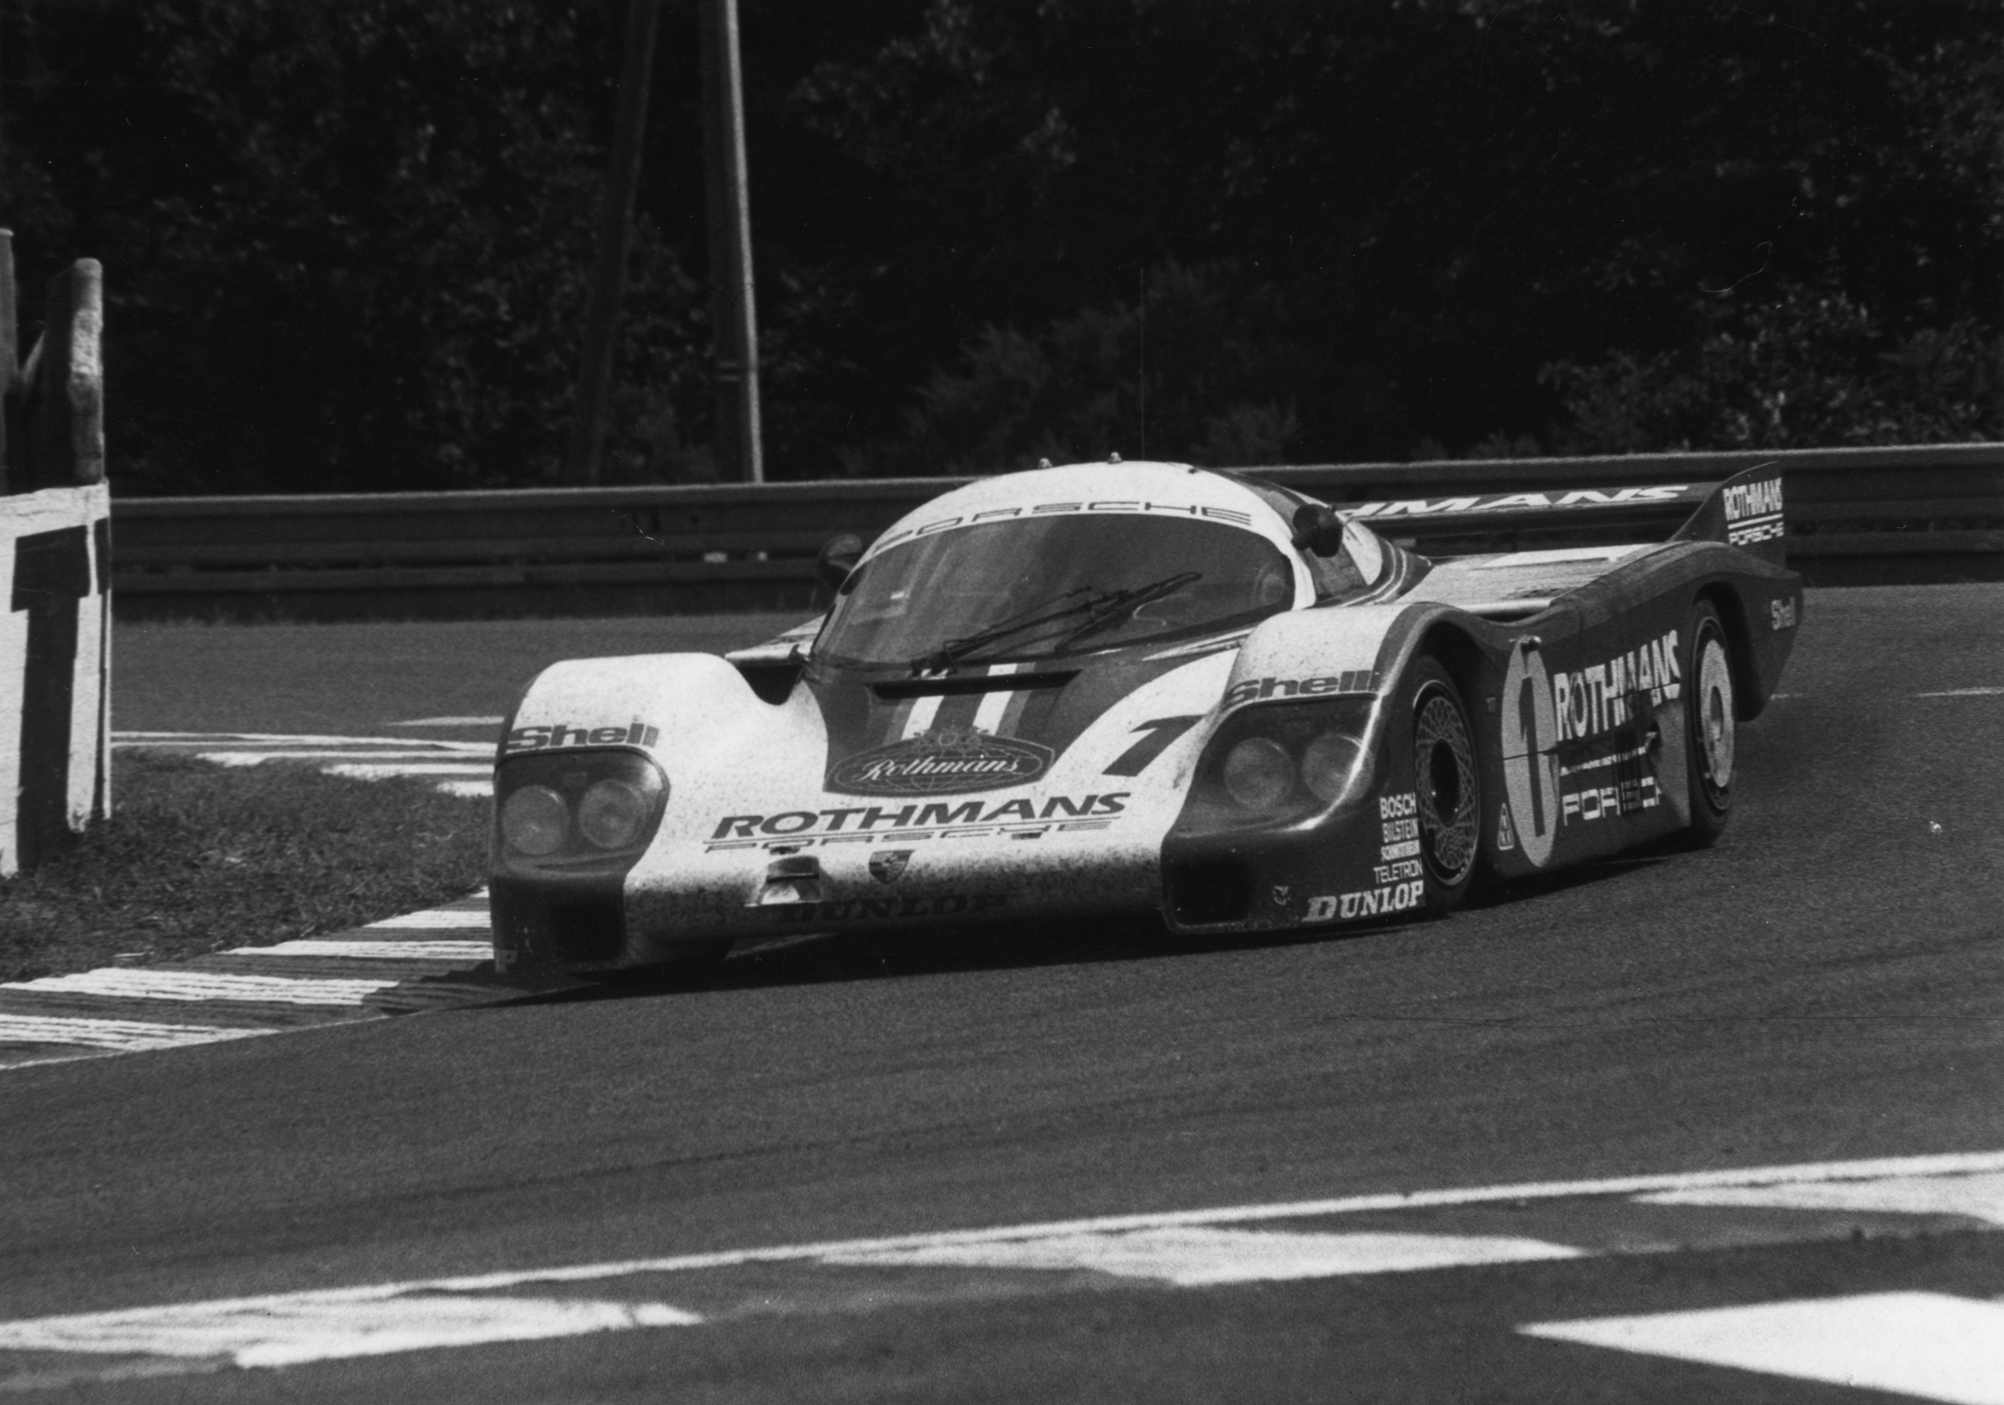 The Porsche 956, driven by Derek Bell and Jacky Ickx in 1982, stunned with its speed. The upgraded version, the 962C, was even faster.